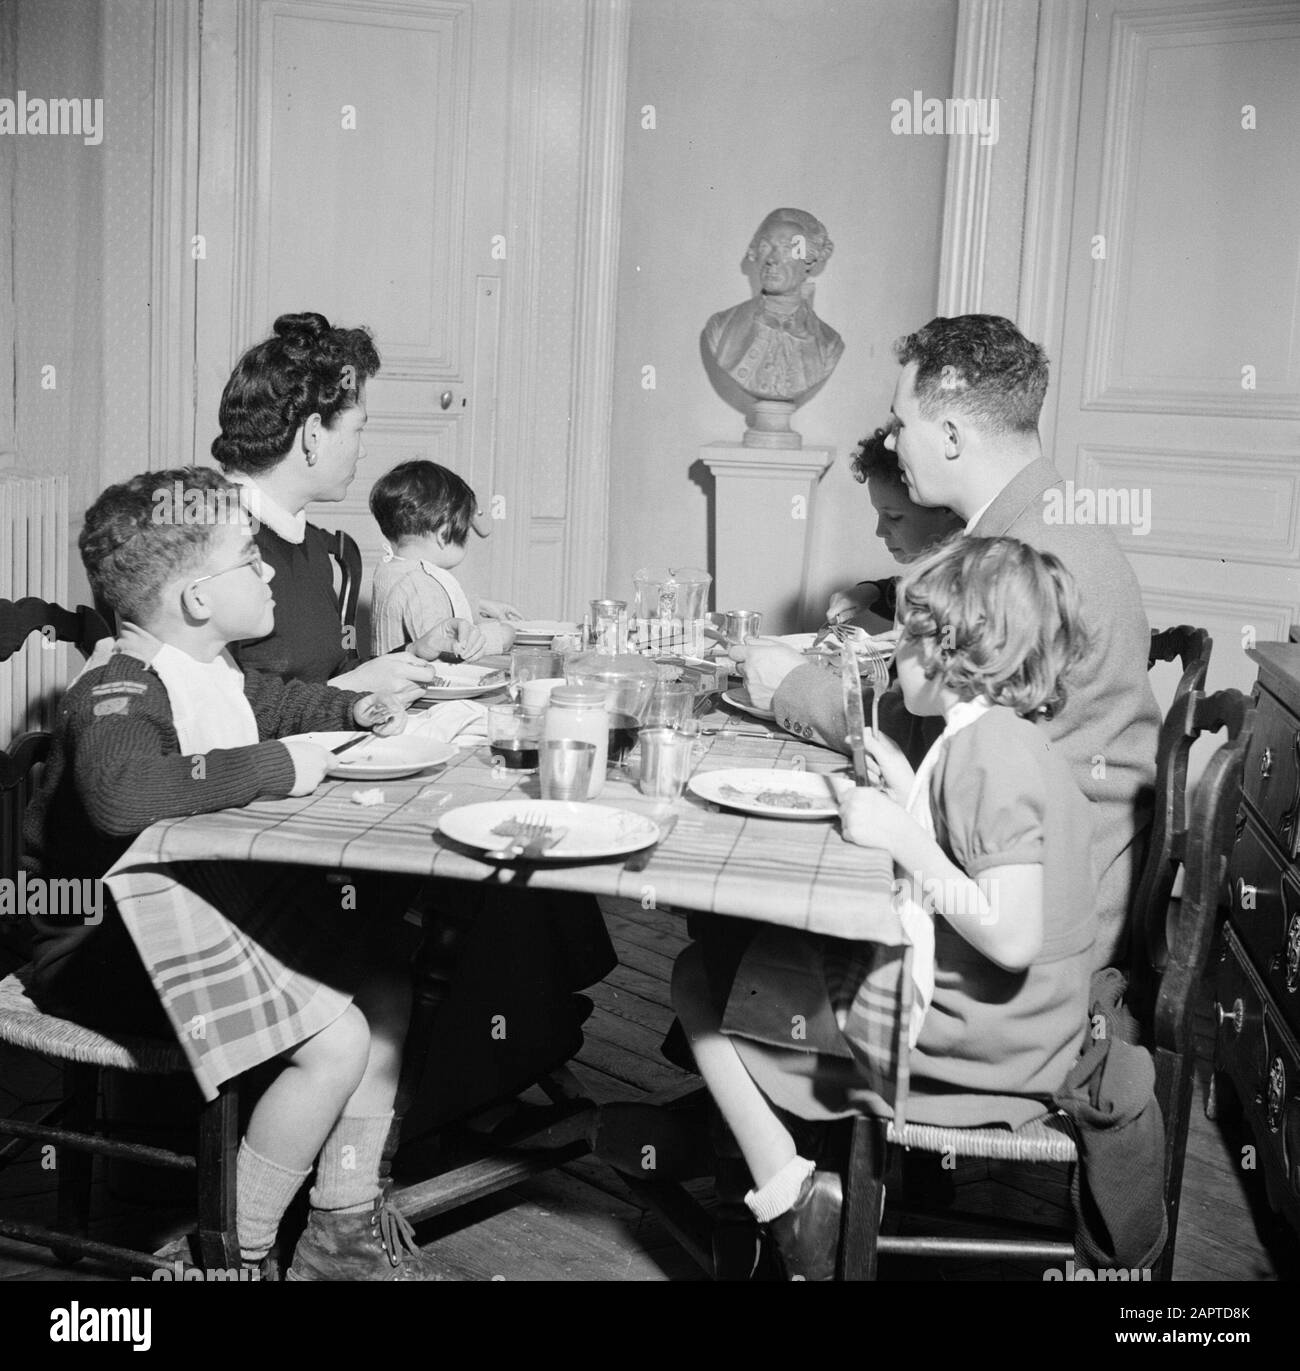 Residents of an apartment building in Paris  Family at the table during the meal Date: 1950 Location: France, Paris Keywords: sculptures, families, children, meals, crockery Stock Photo